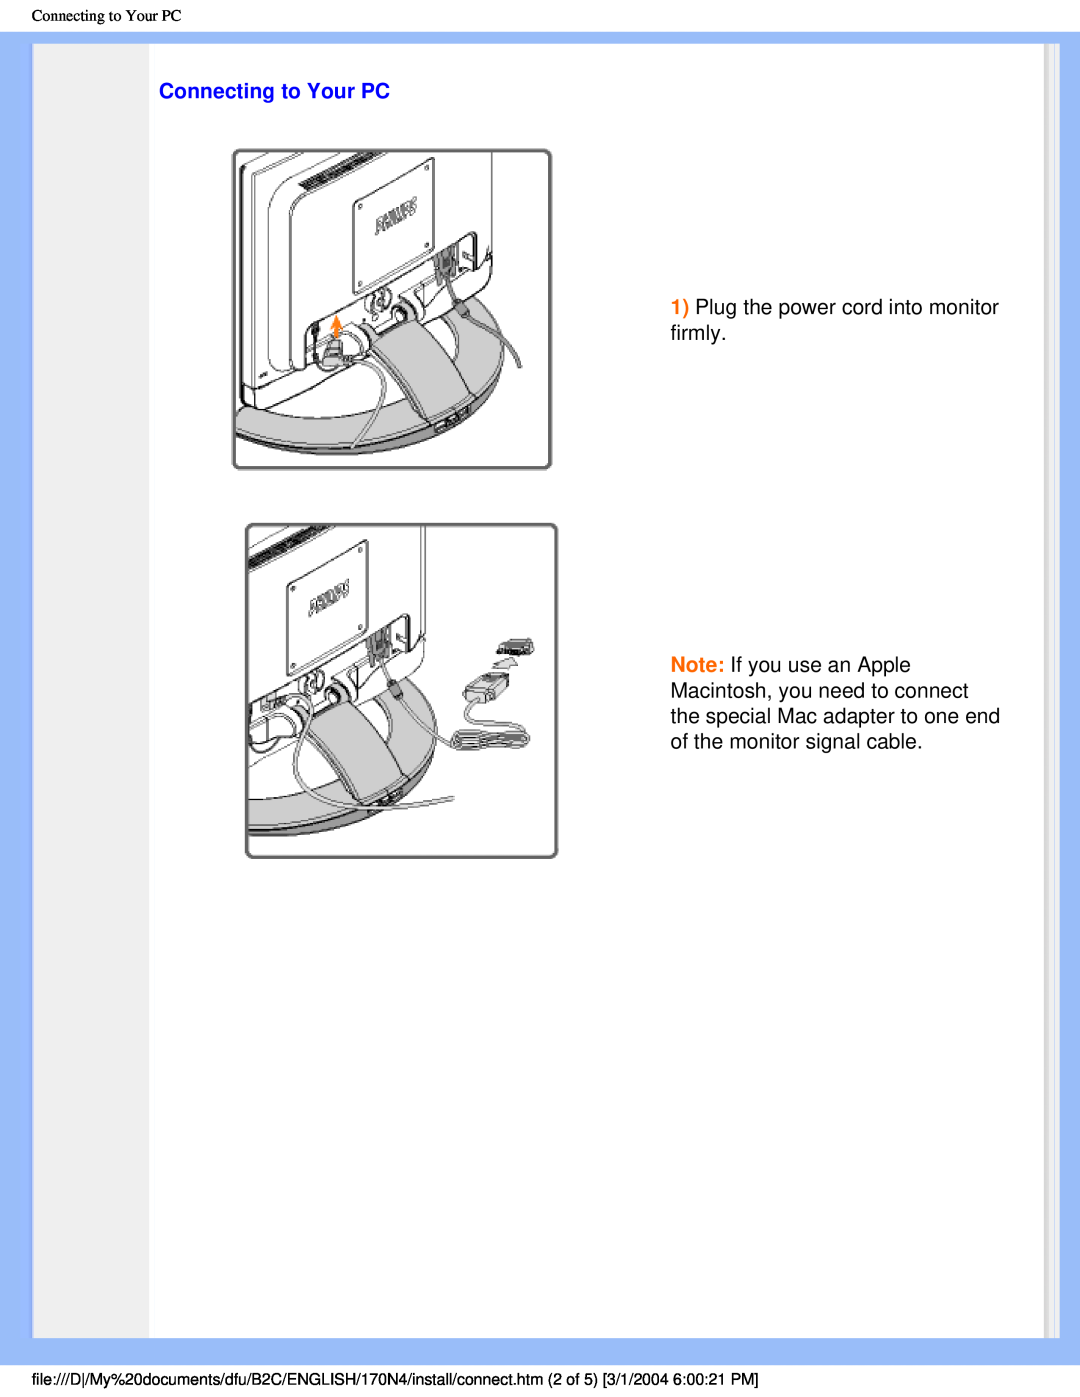 Philips 170N4 user manual Connecting to Your PC, Plug the power cord into monitor firmly 